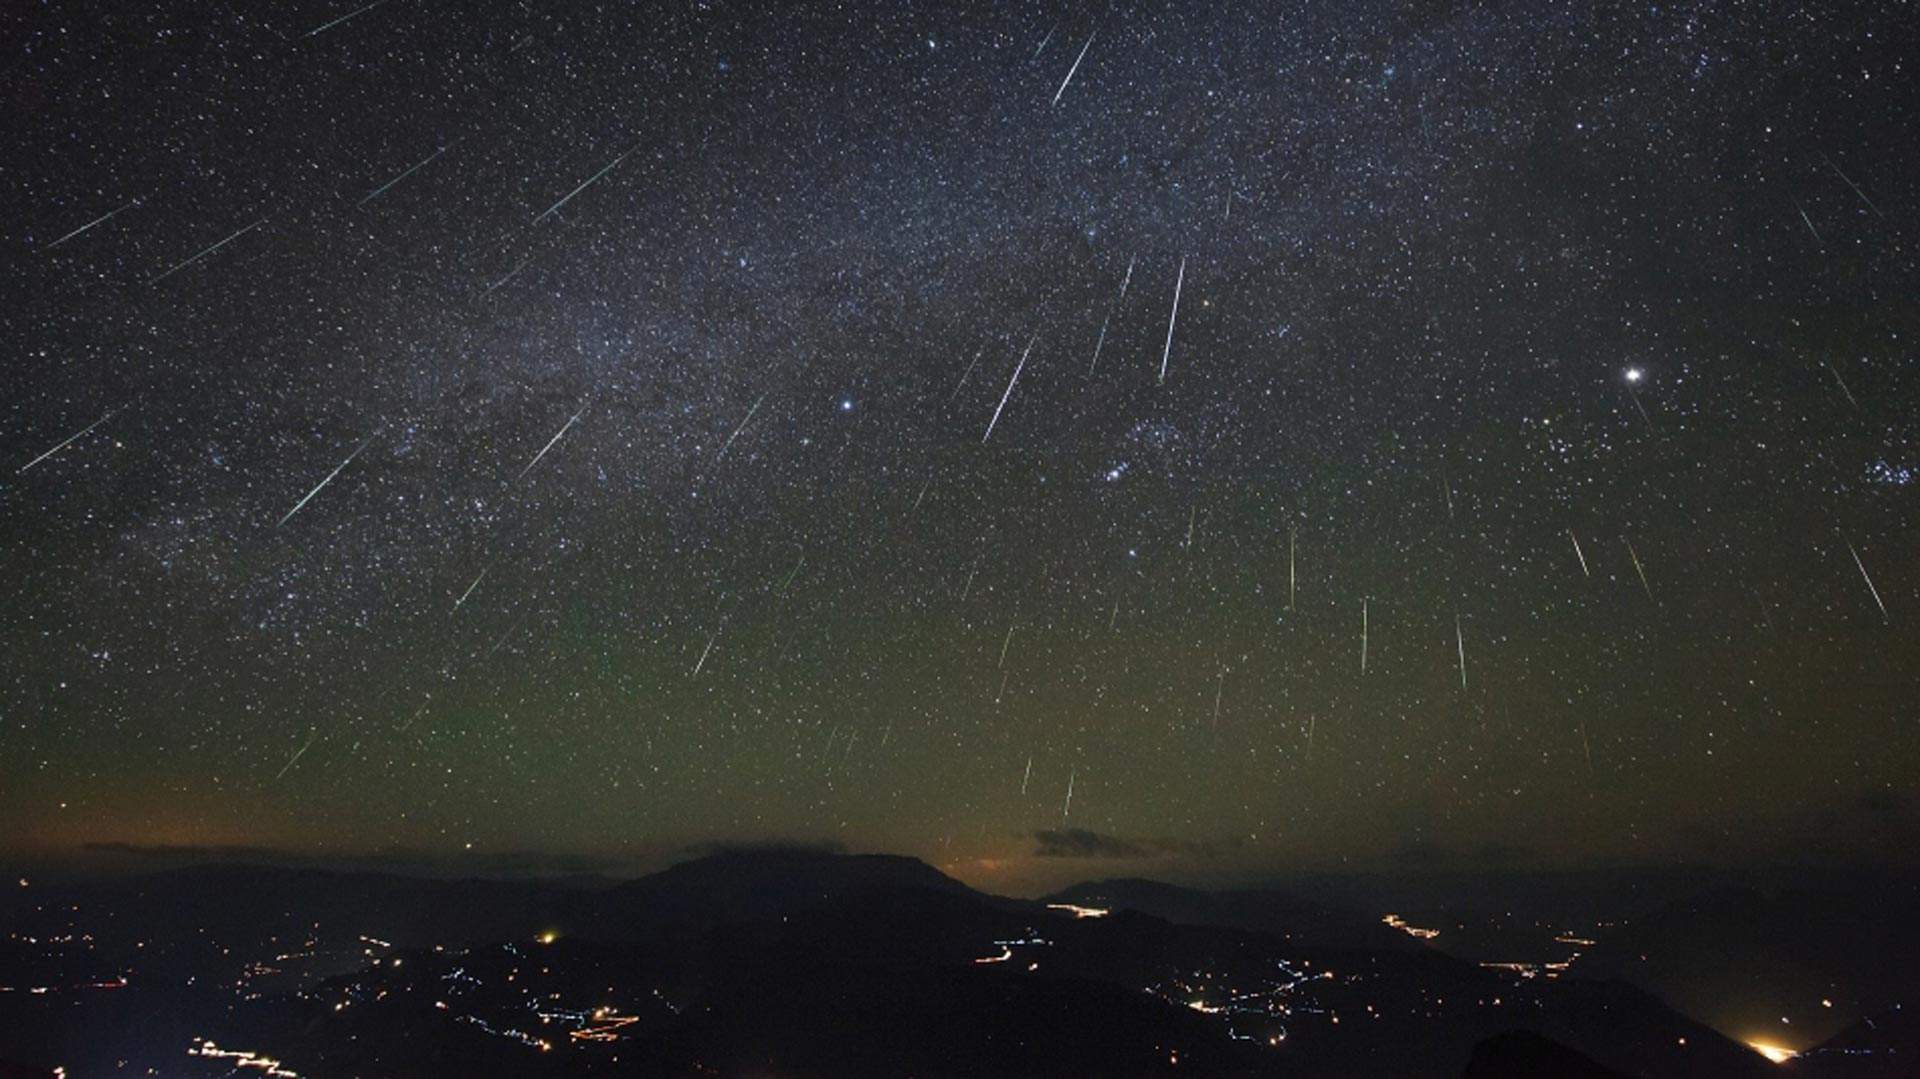 The Impressive Geminids Meteor Shower Will Be Visible in New Zealand Next Month